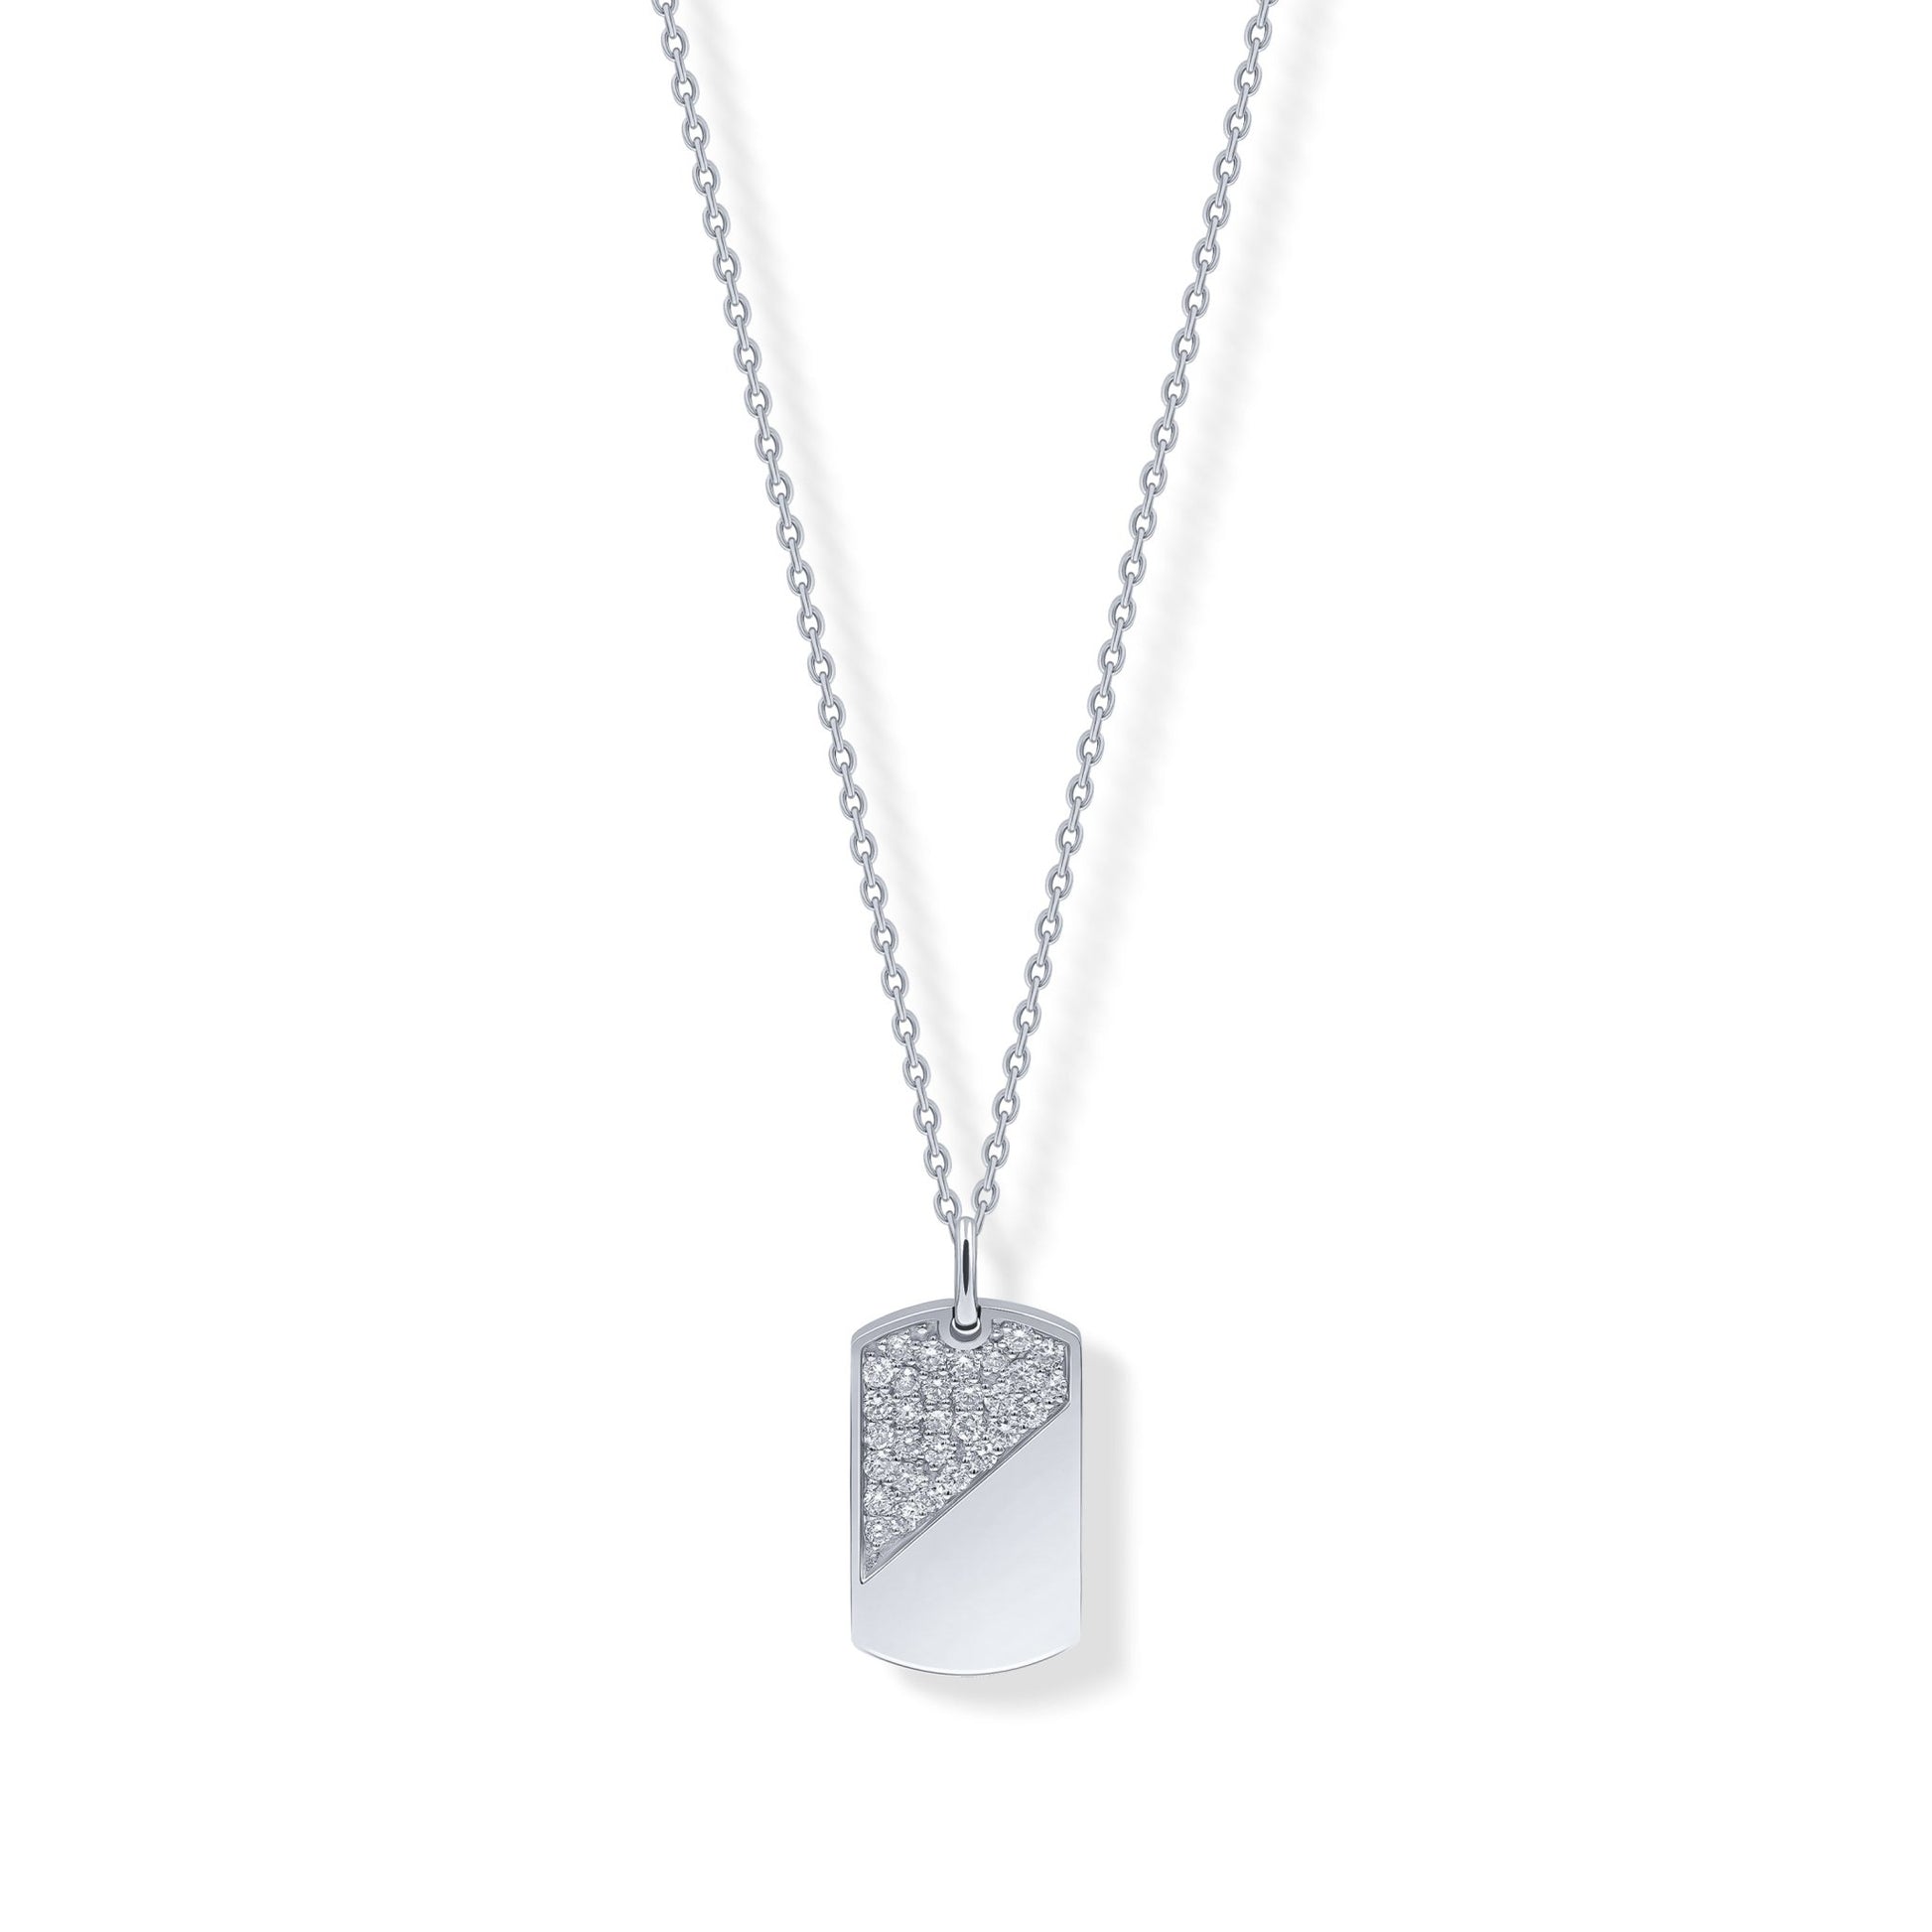 Edson Necklace in Diamond -Platinum , for him - 18k Gold - Lynor